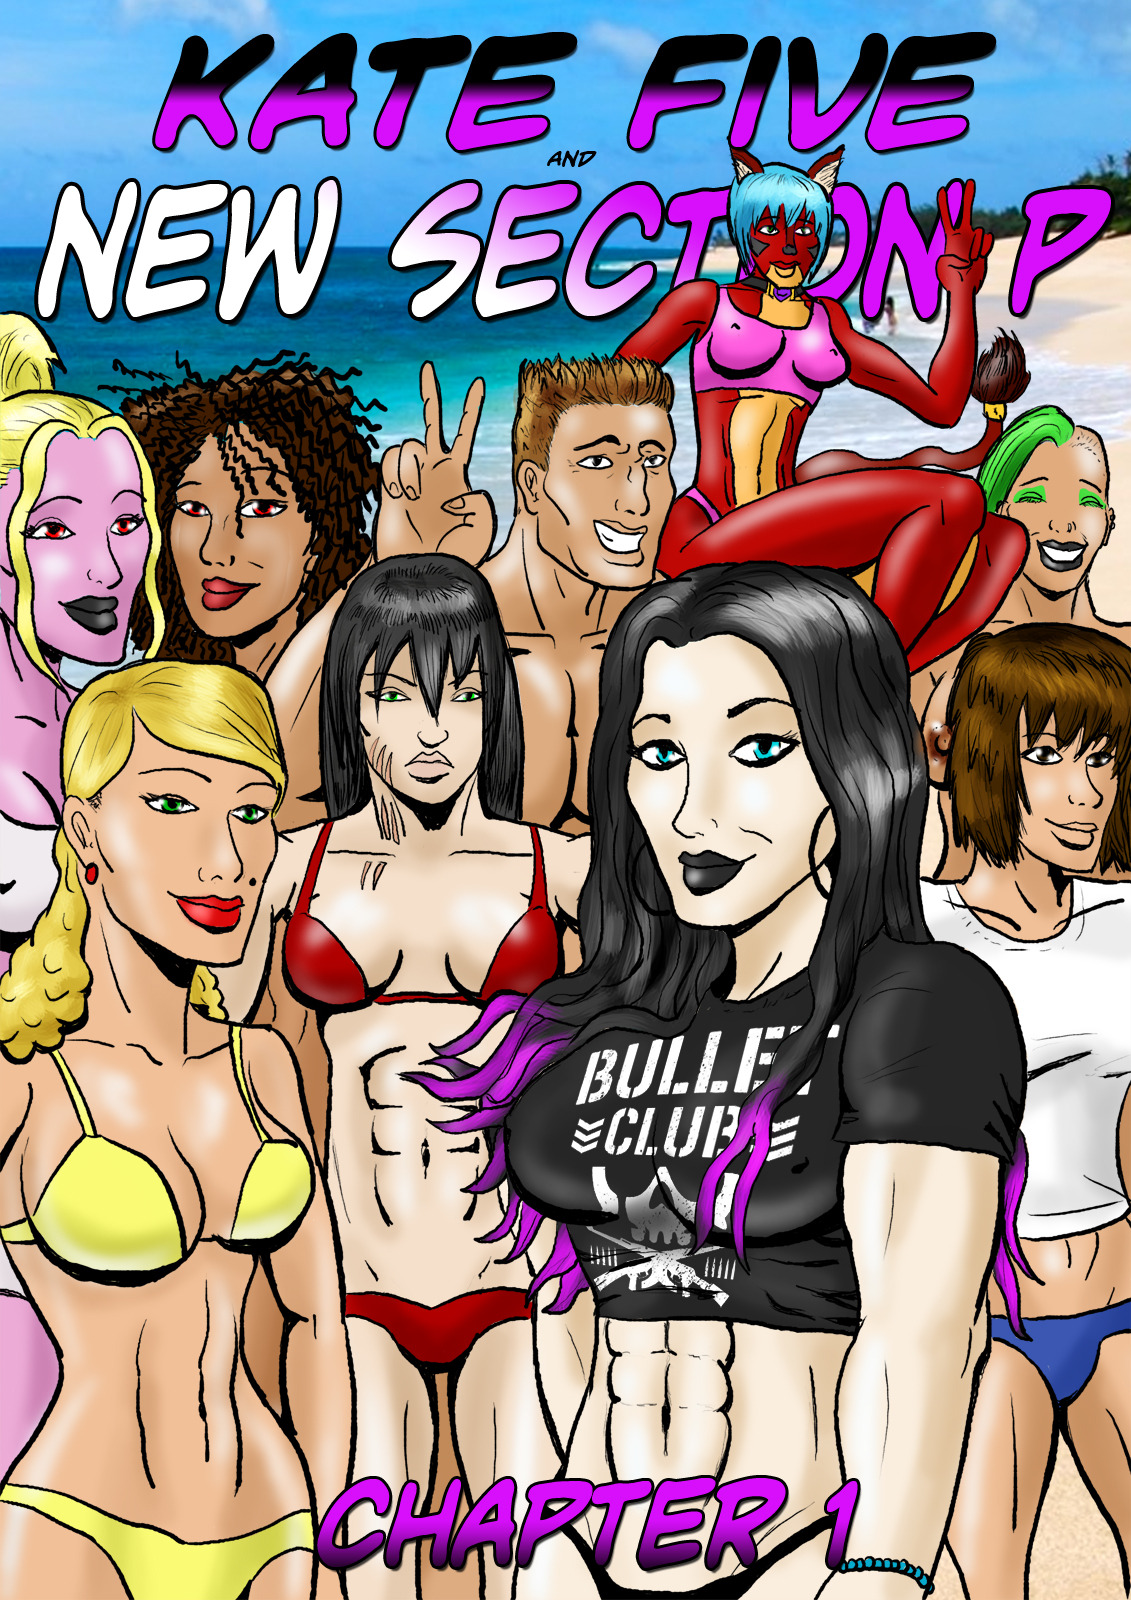 Kate Five and New Section P Chapter 1 Cover by cyberkitten01   The future is now!